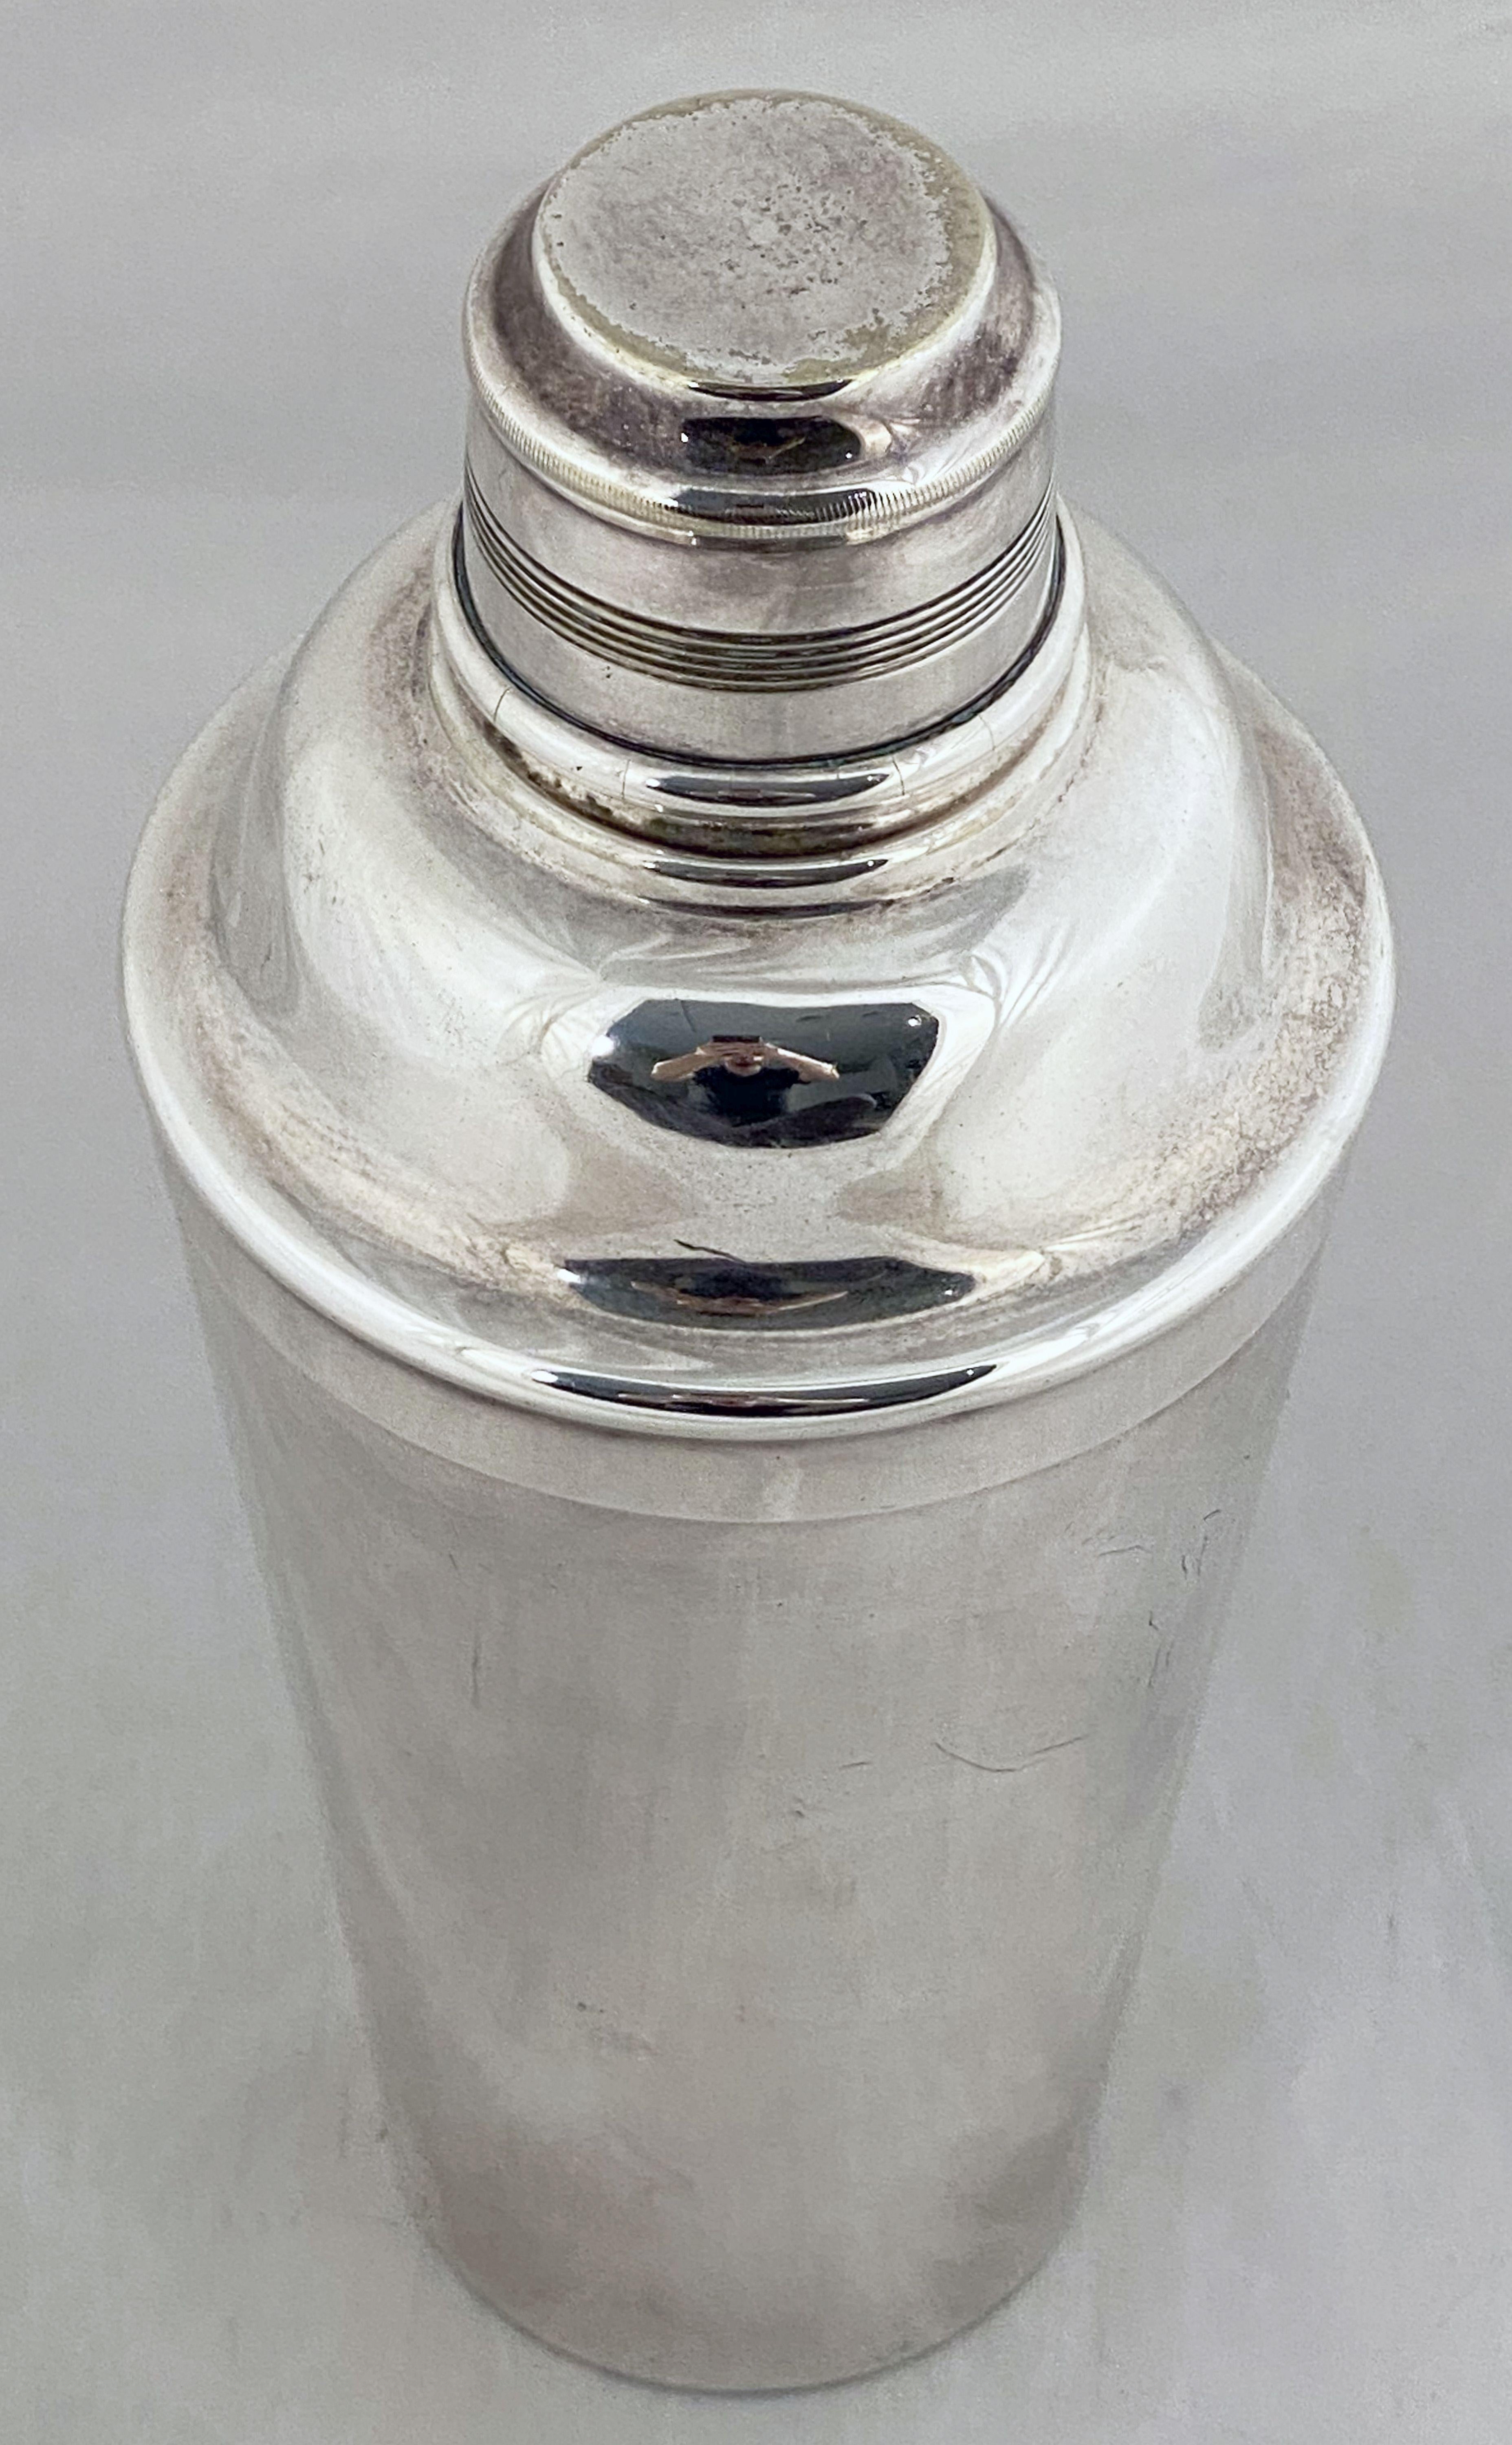 A vintage English cylindrical martini or cocktail shaker of fine plate silver from the Art Deco period, with engine-turned removable cap and strainer.

Marked on base: EPNS

Perfect for the bar. Even better for martinis.